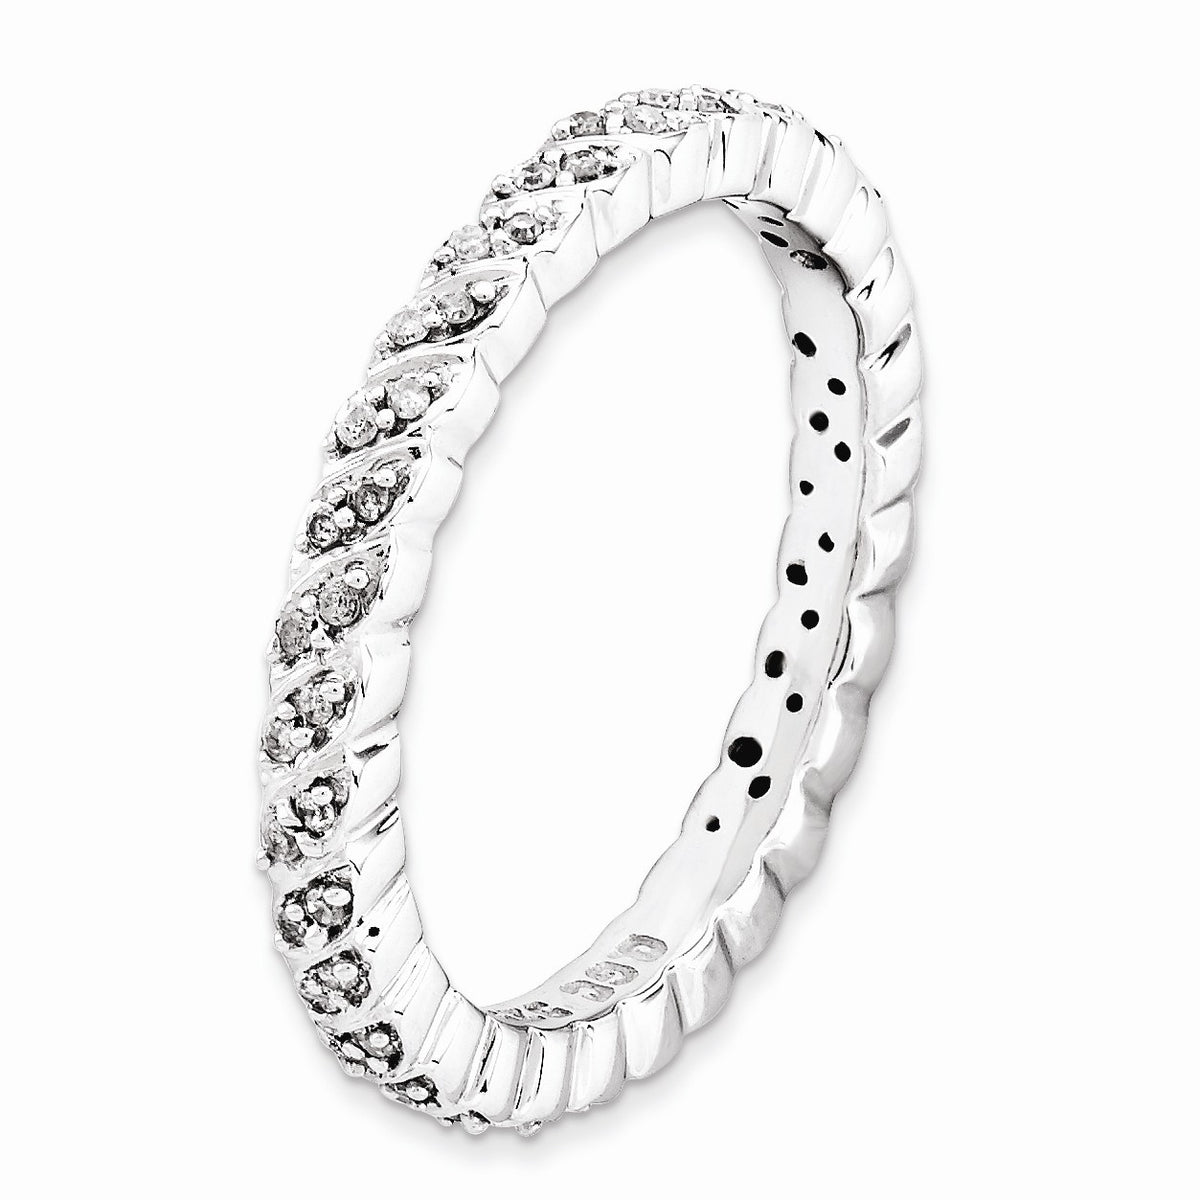 Alternate view of the 2.5mm Sterling Silver Stackable 1/5 Cttw HI/I3 Diamond Petal Band by The Black Bow Jewelry Co.